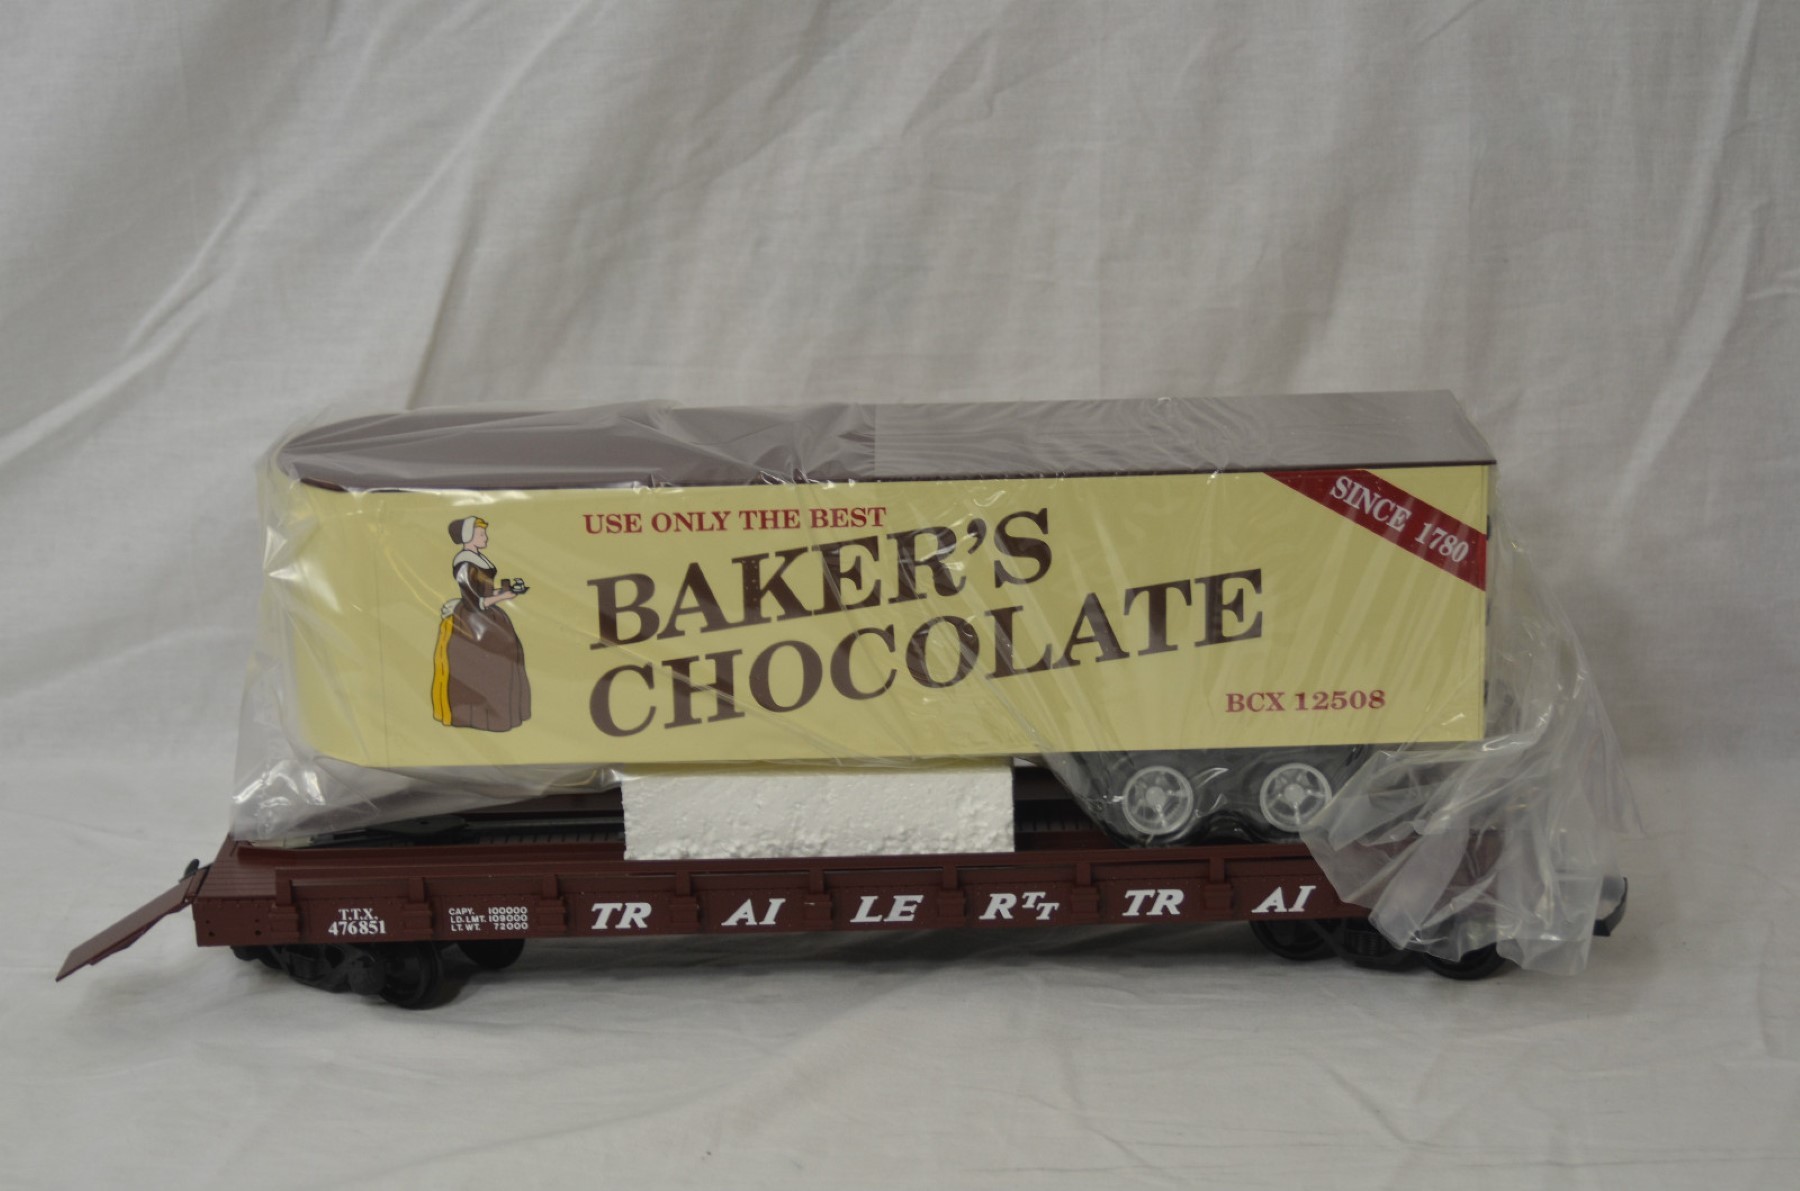 R1798 Bakers Chocolate